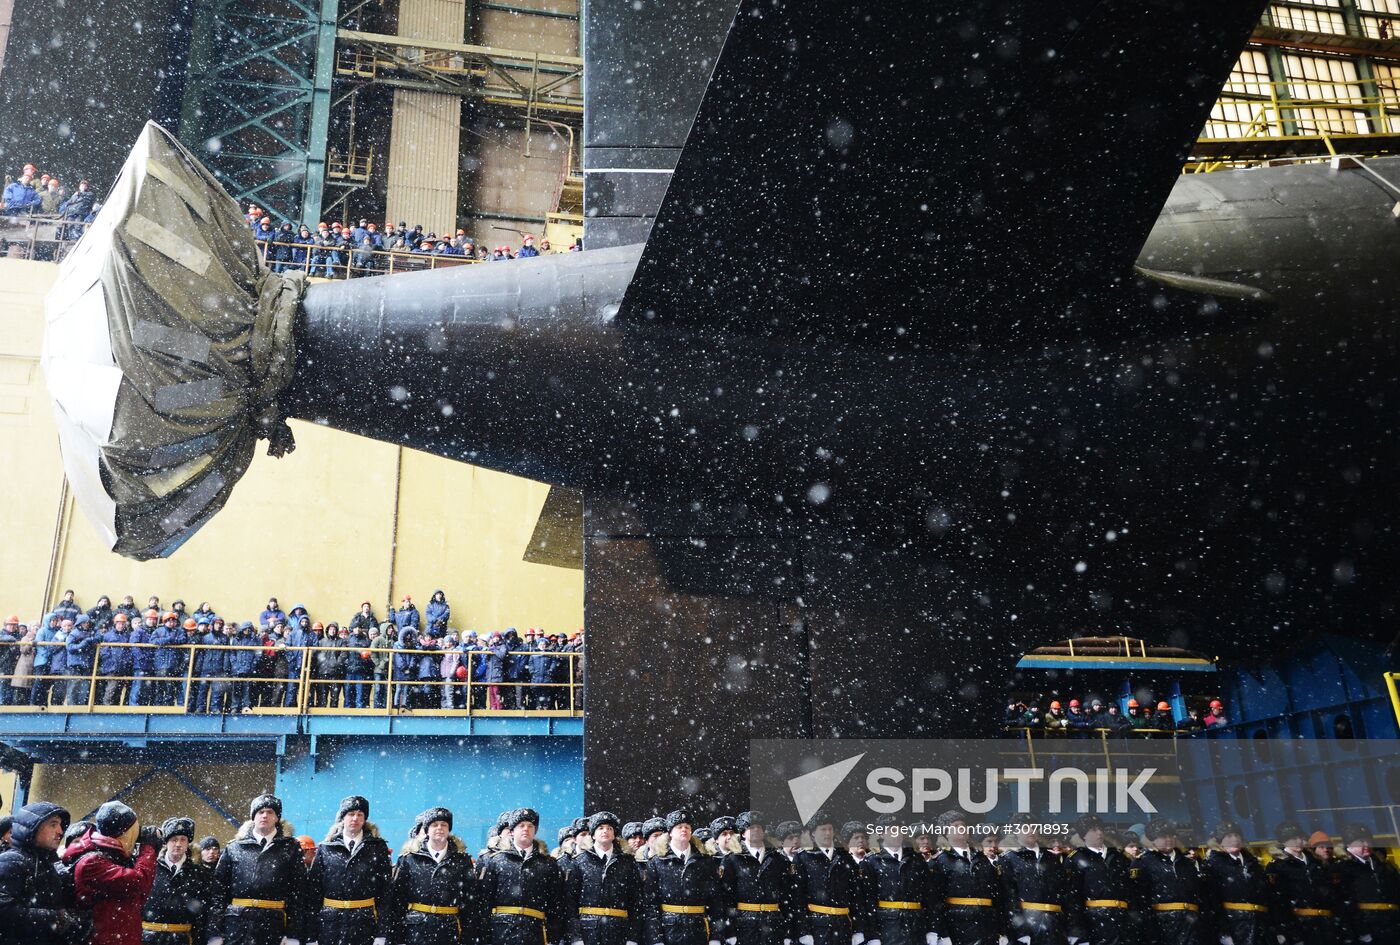 Nuclear attack submarine Kazan of Russian Navy is launched